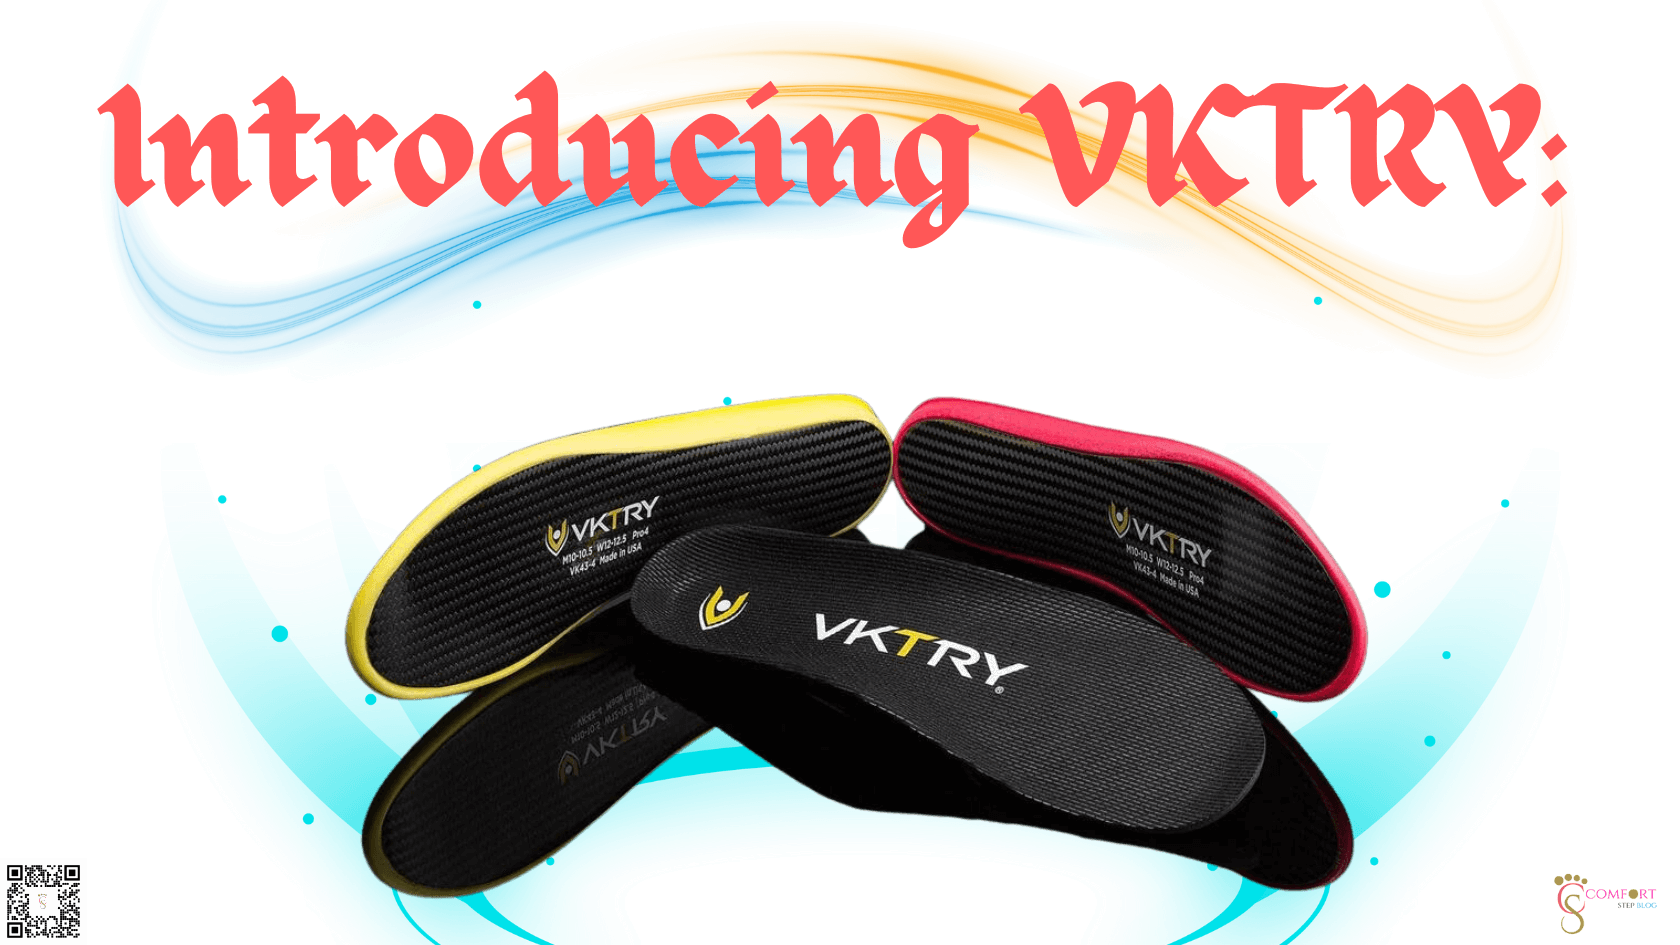 Introducing VKTRY: The Ultimate Performance Insoles